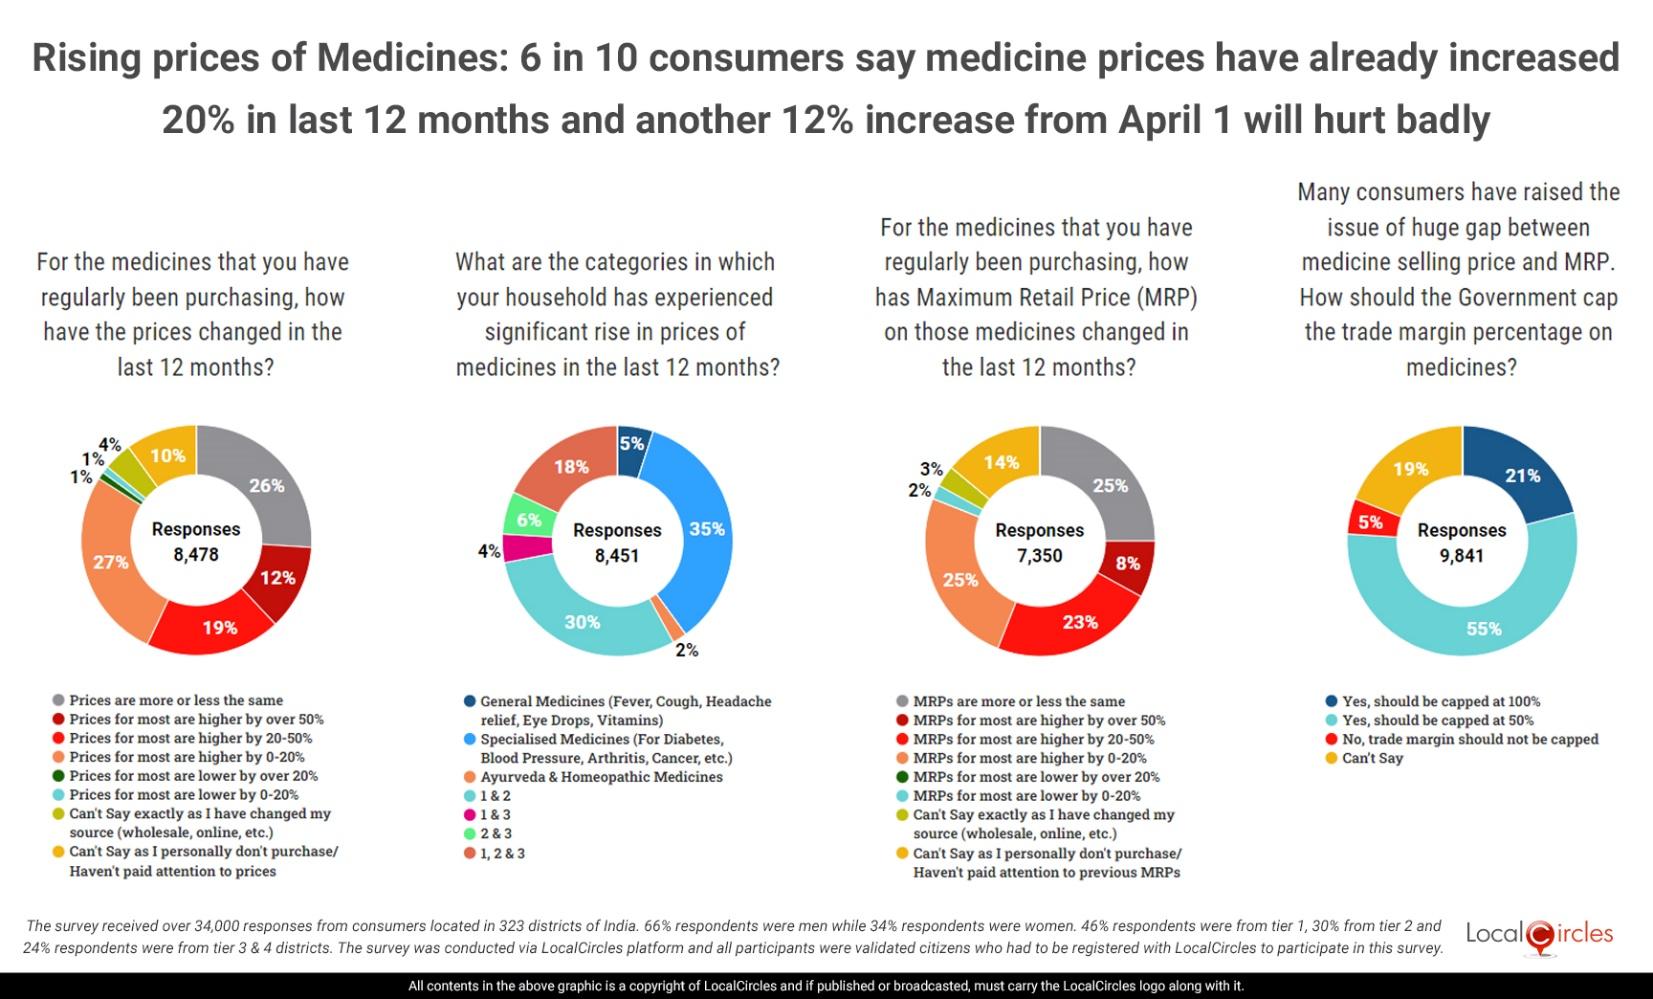 Rising prices of Medicines: 6 in 10 consumers say medicine prices have already increased 20% in last 12 months and another 12% increase from April 1 will hurt badly